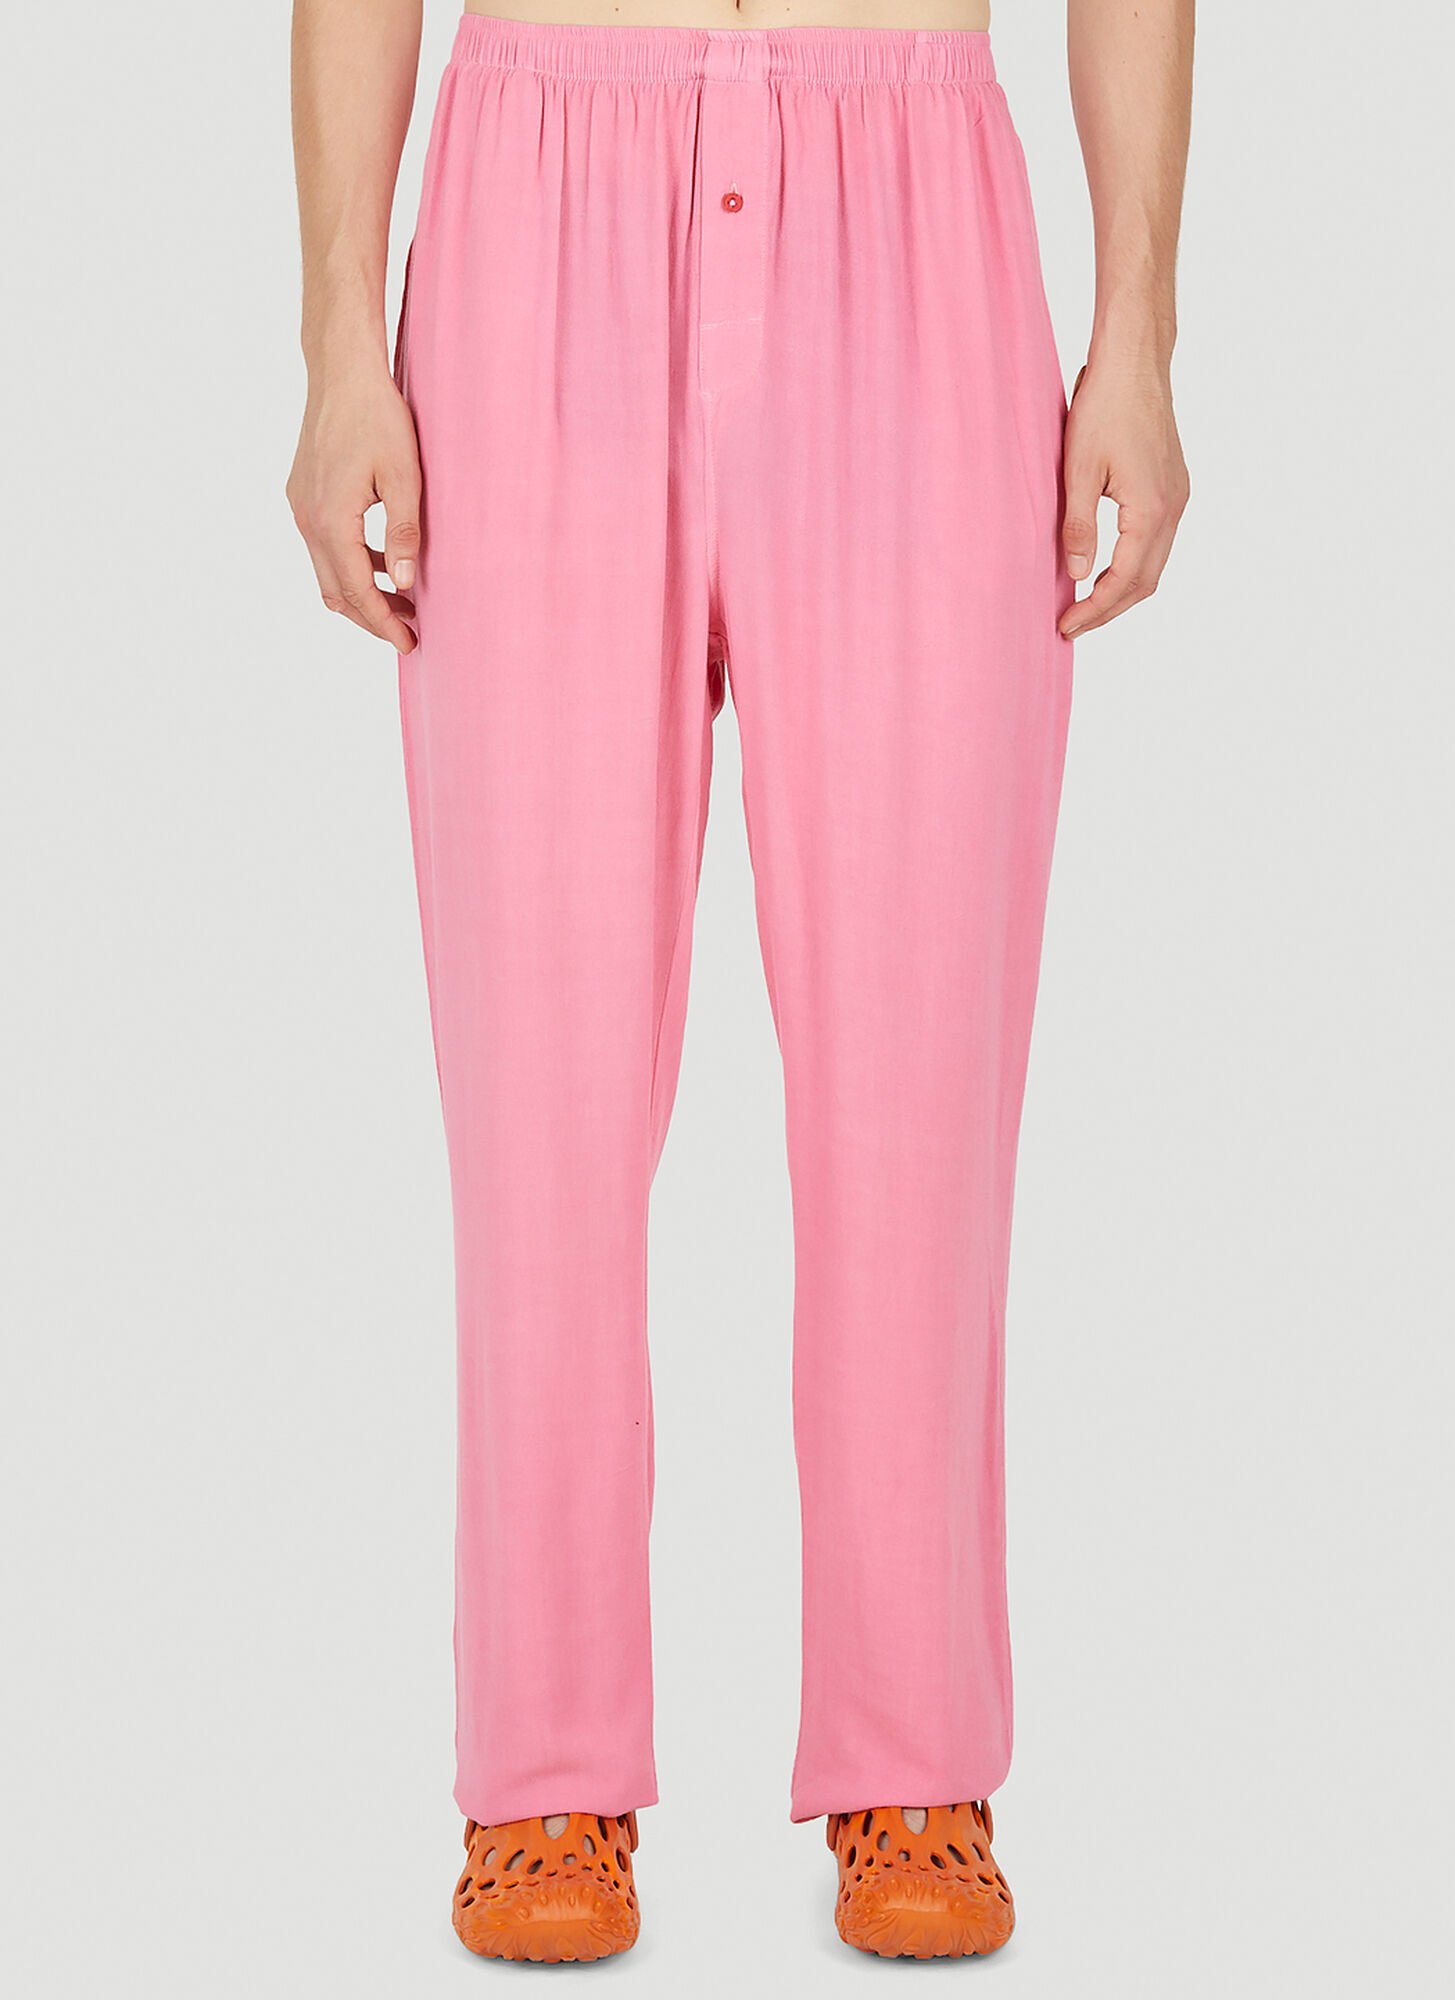 Gallery Dept. Chateau Josue Cotton Pyjama Trousers In Pink